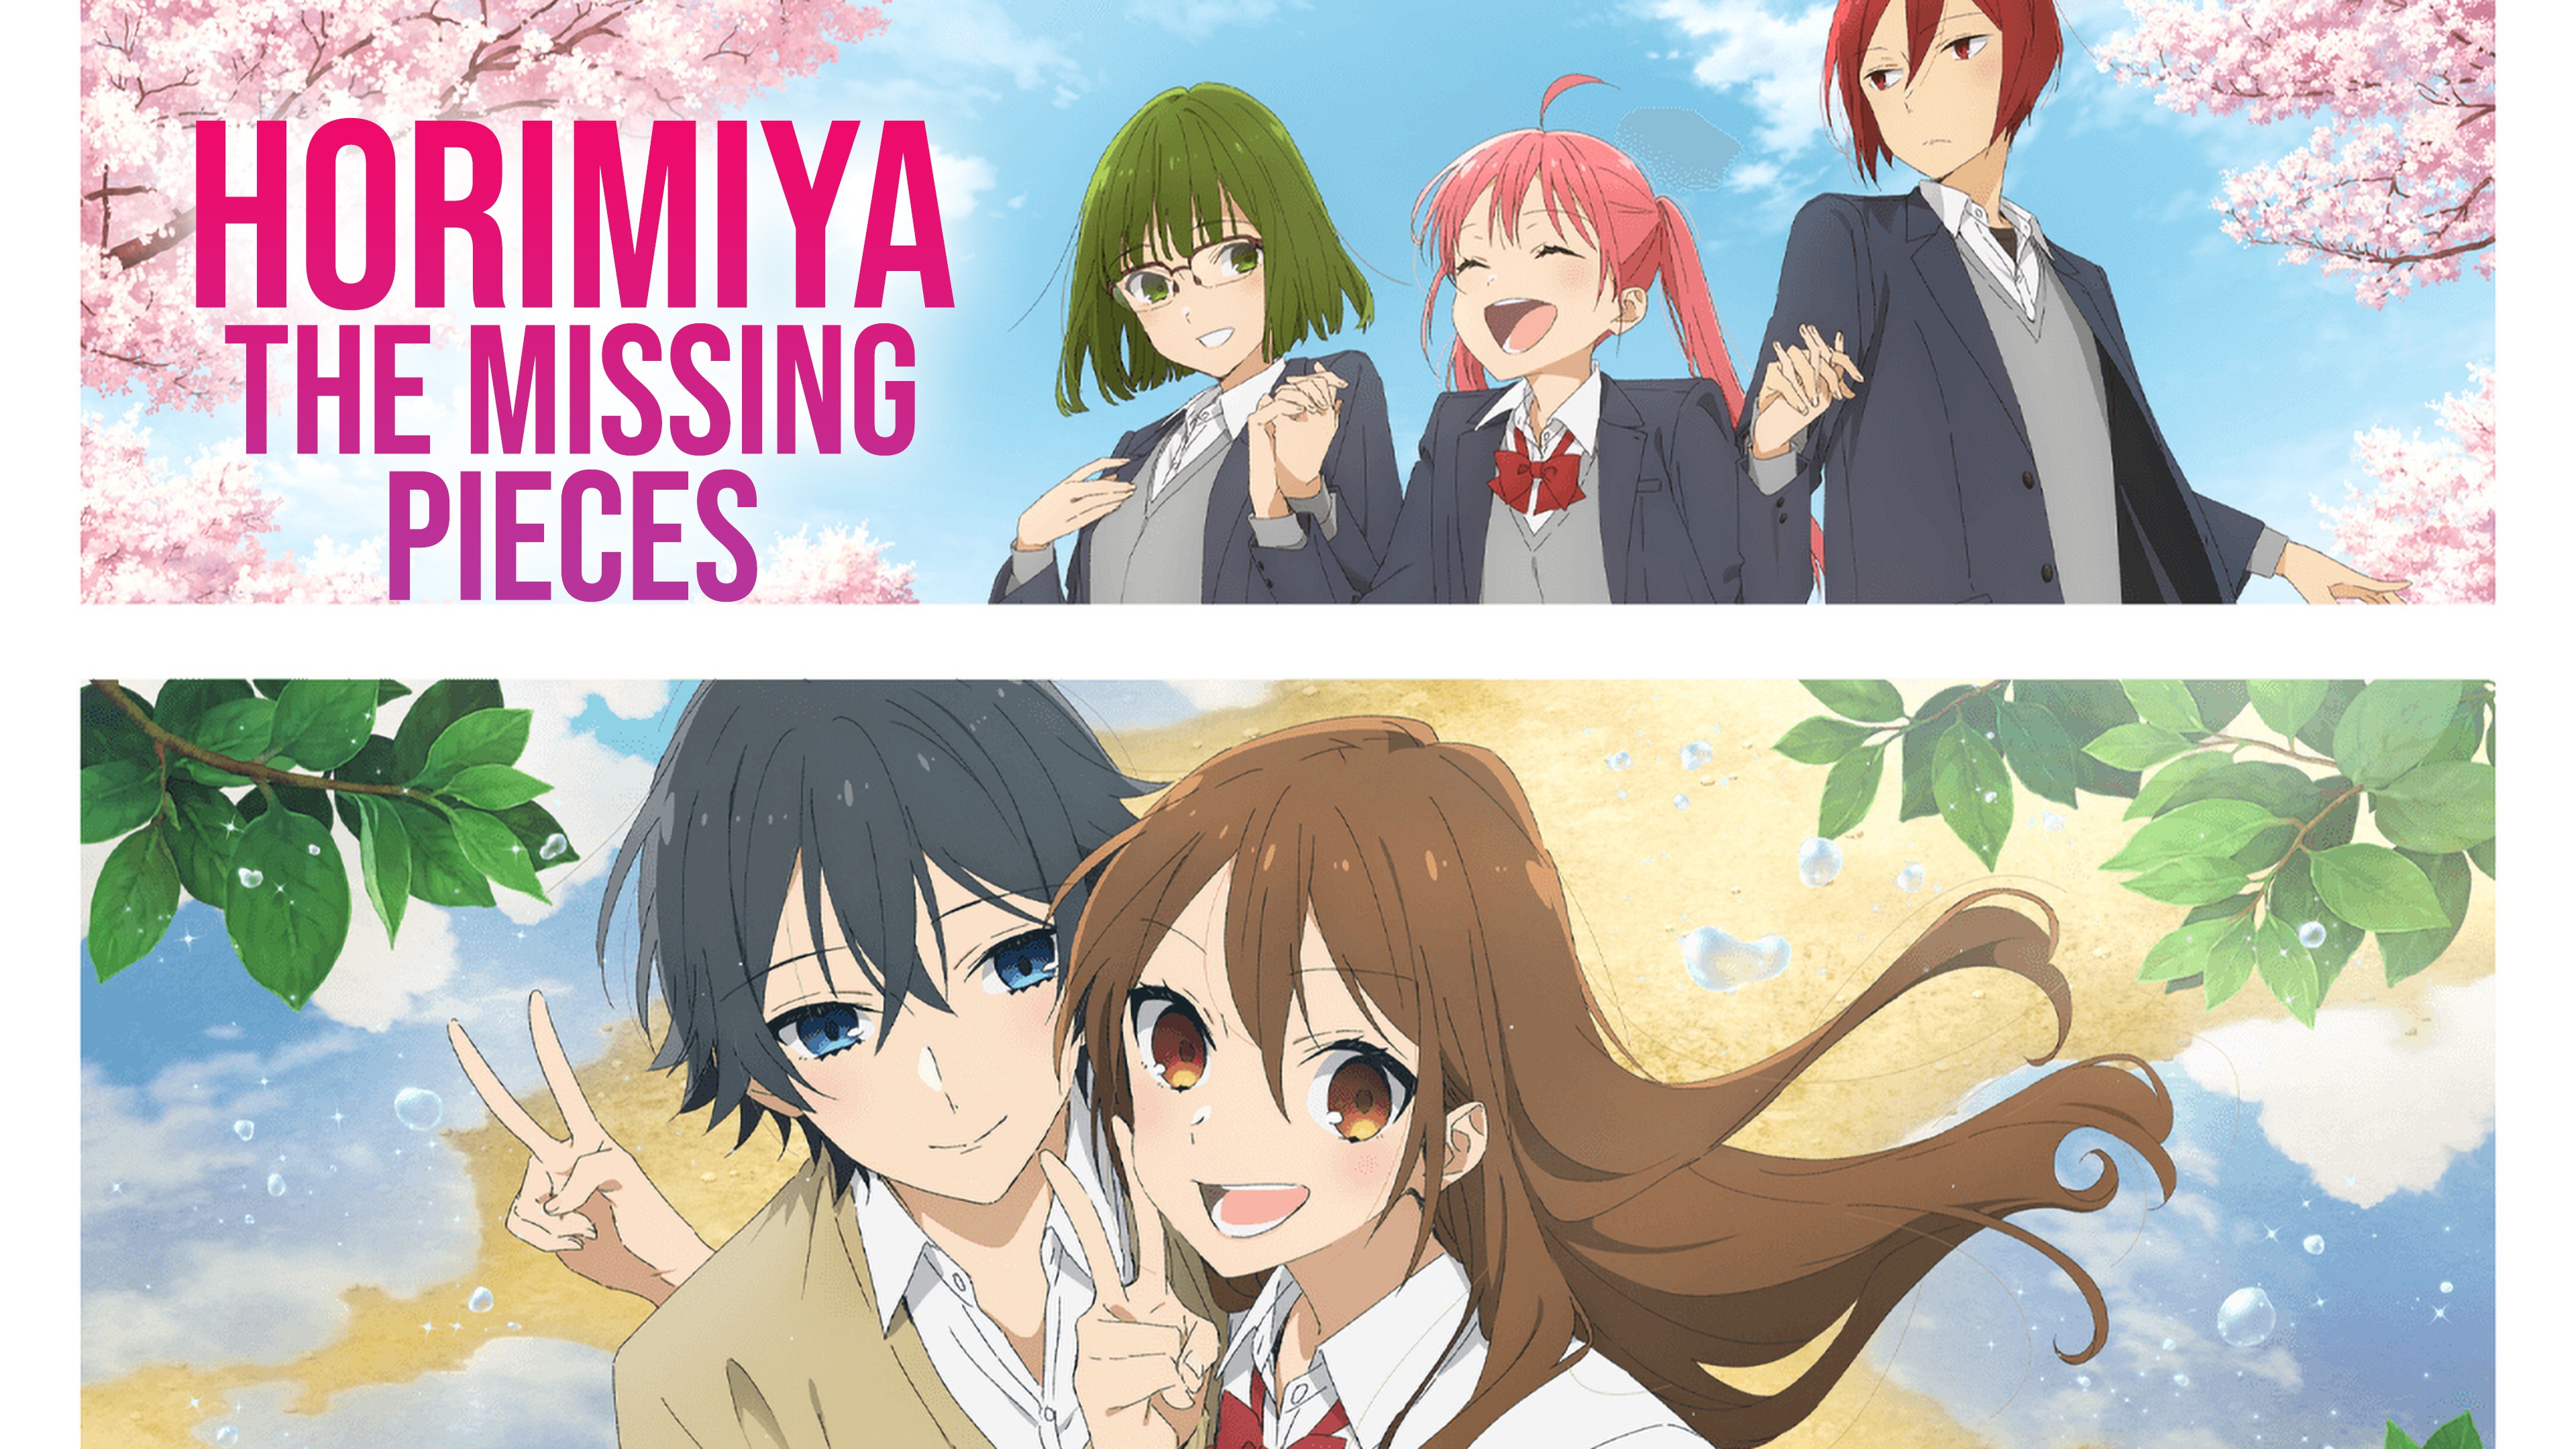 Horimiya: The Missing Pieces TV Anime Brings the Fun and Gun to